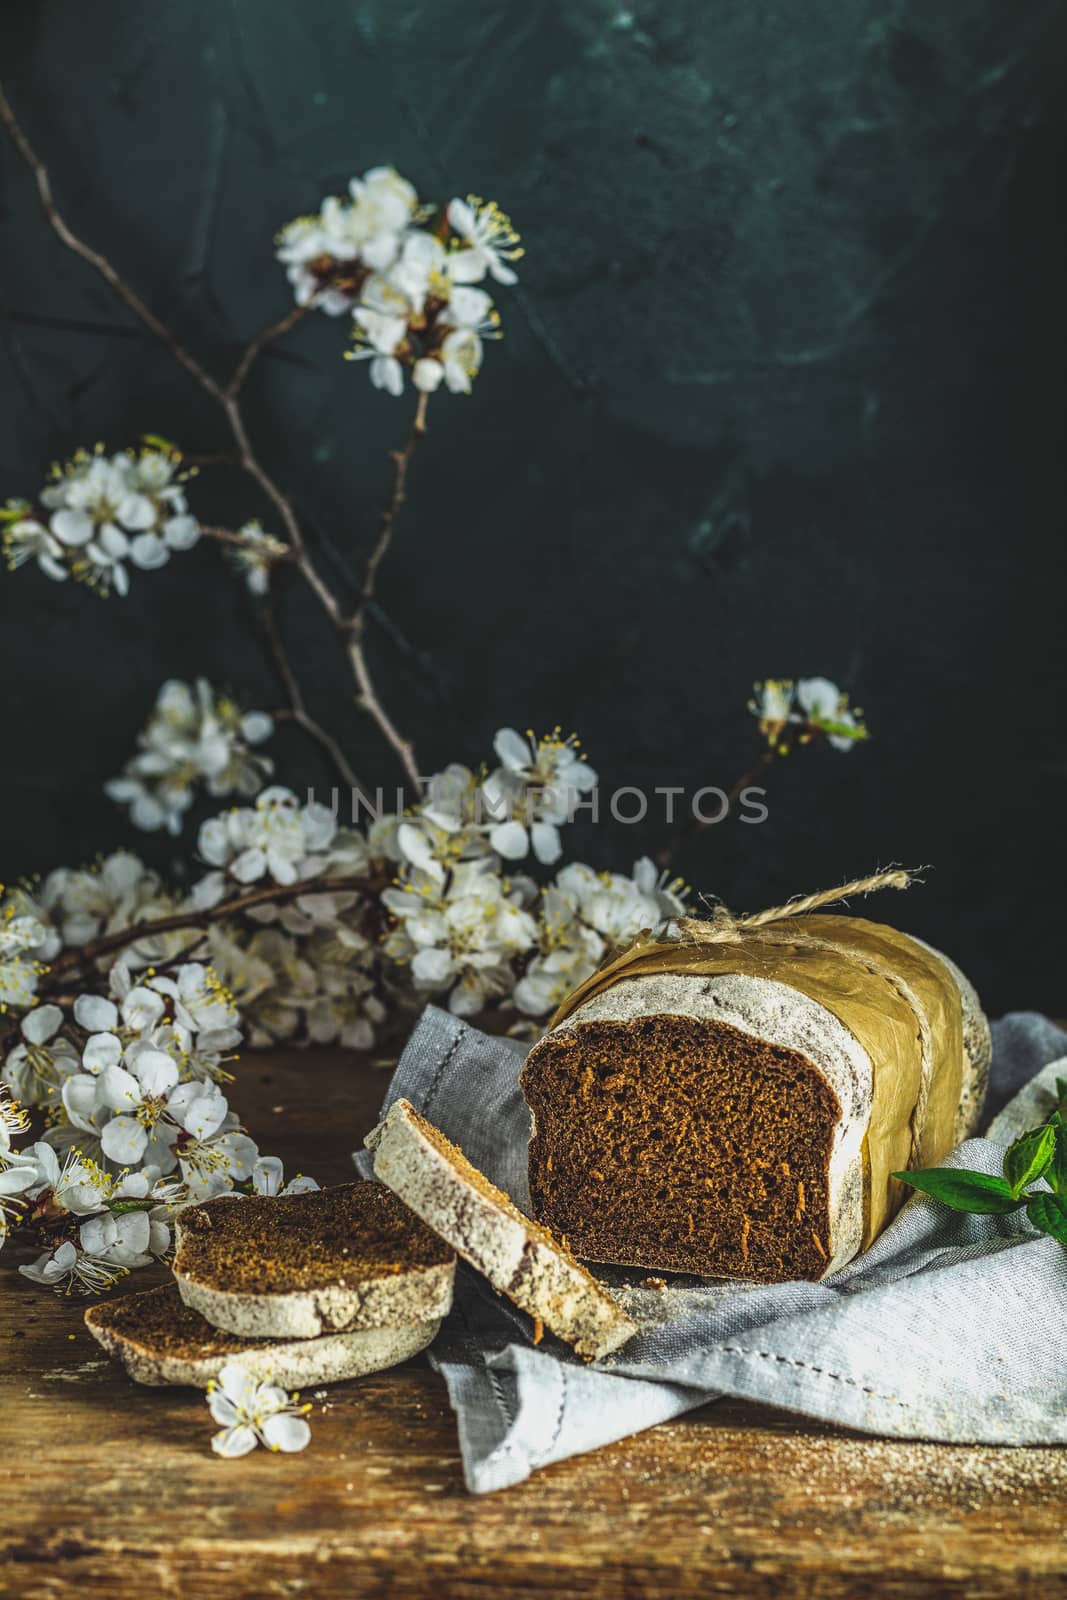 Freshly baked rye handmade breads on old wooden table with linen napkin and apricot tree blossom branch. Dark rustic style. Photo styling of paintings by Flemish painters